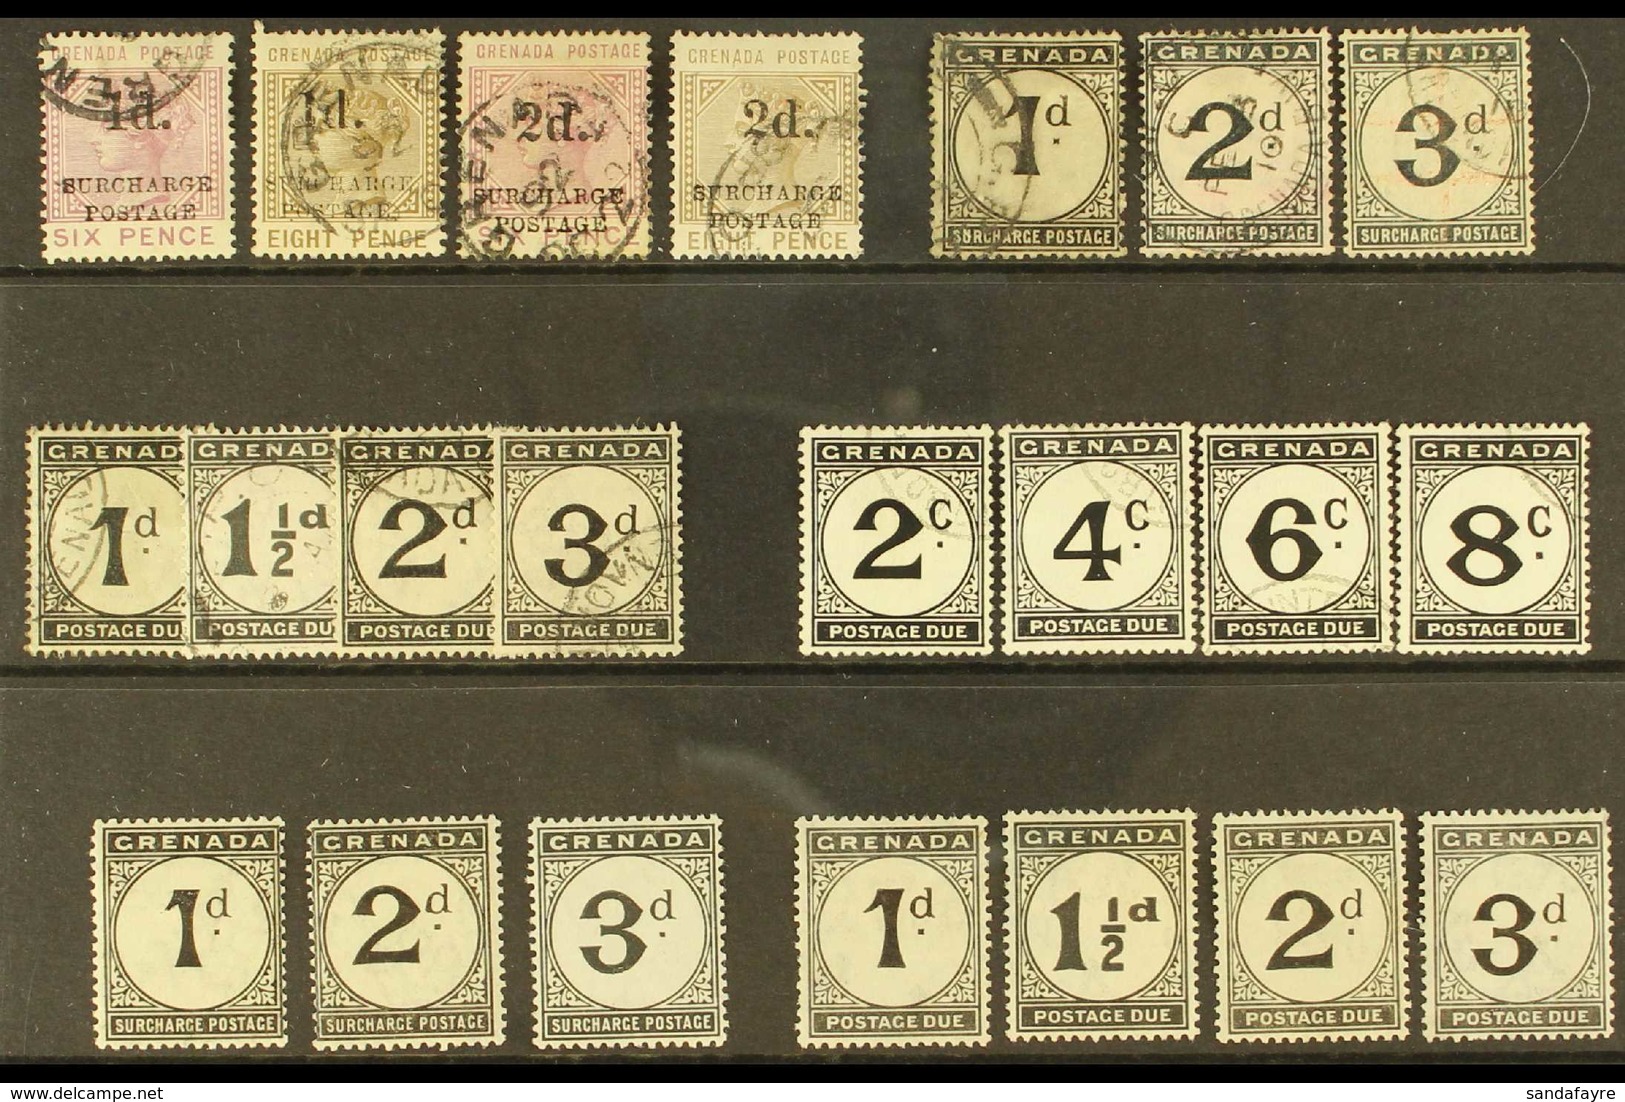 POSTAGE DUES 1892 - 1952 Mint And Used Collection With 1906 Set Mint, 1921 Set Mint, And 1892 Surcharges To 1952 (SG D4/ - Granada (...-1974)